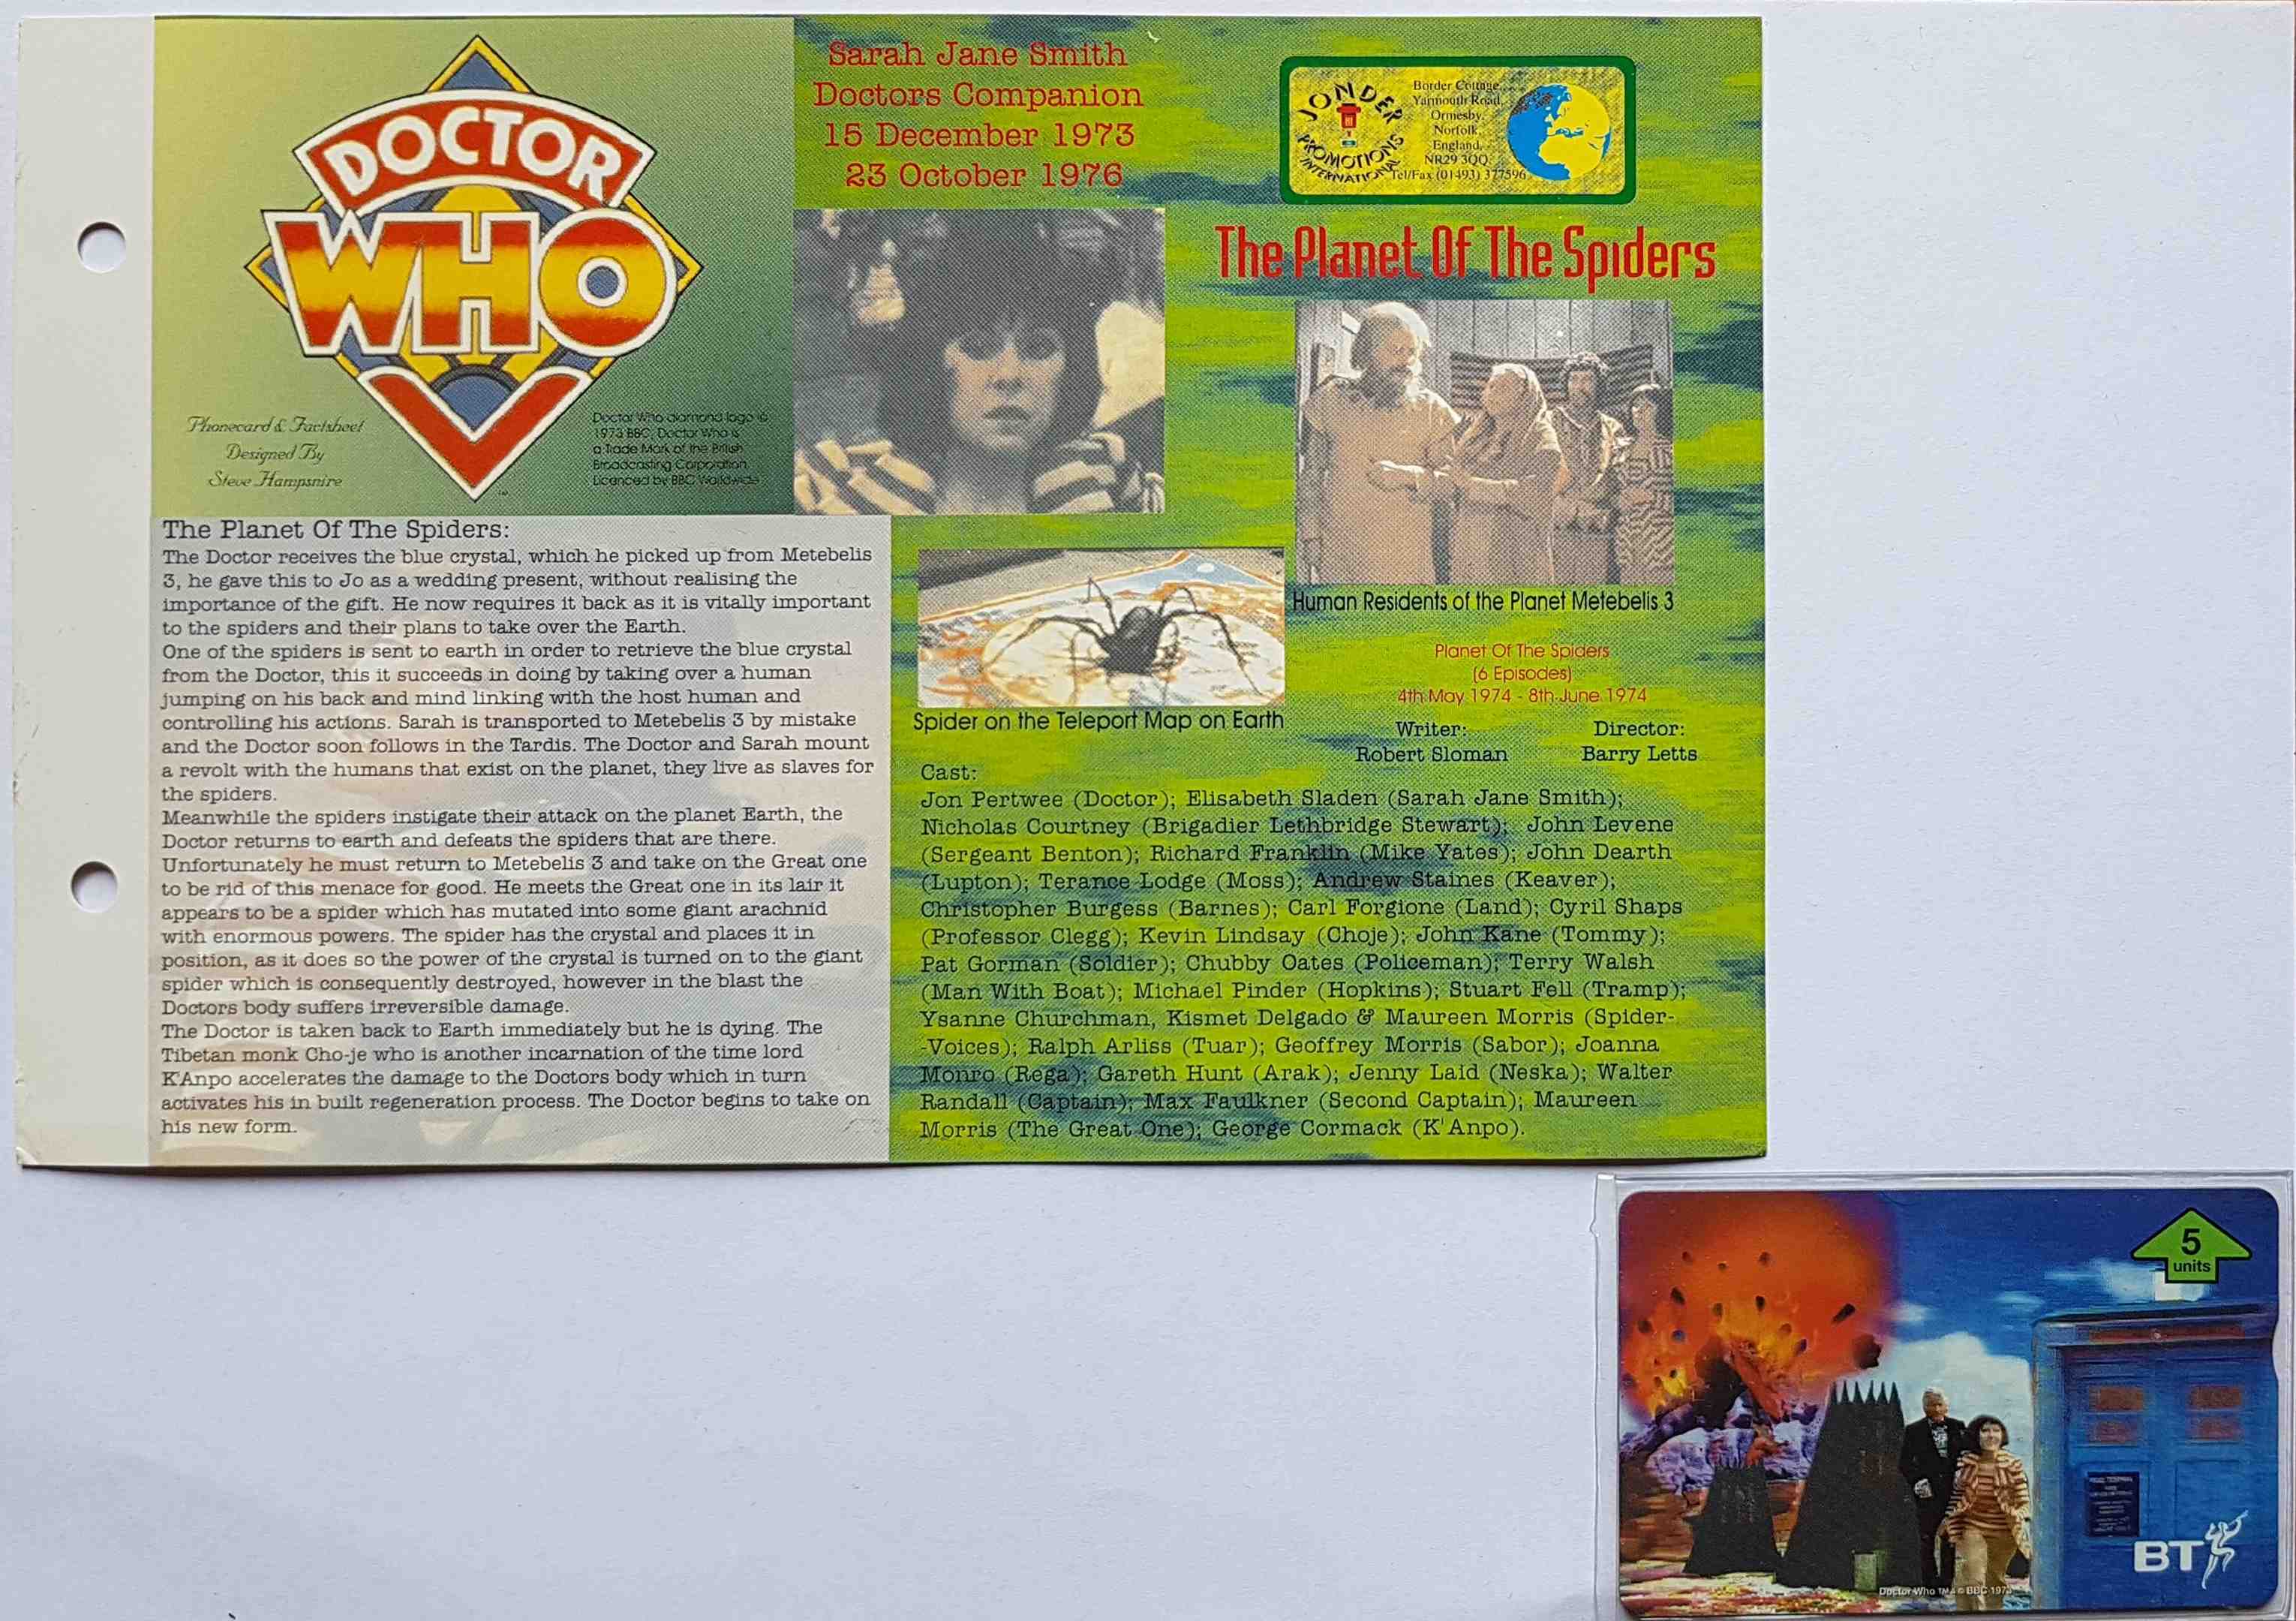 Picture of PC-BTG697 Doctor Who - The planet of the spiders - Phone card by artist  from the BBC records and Tapes library